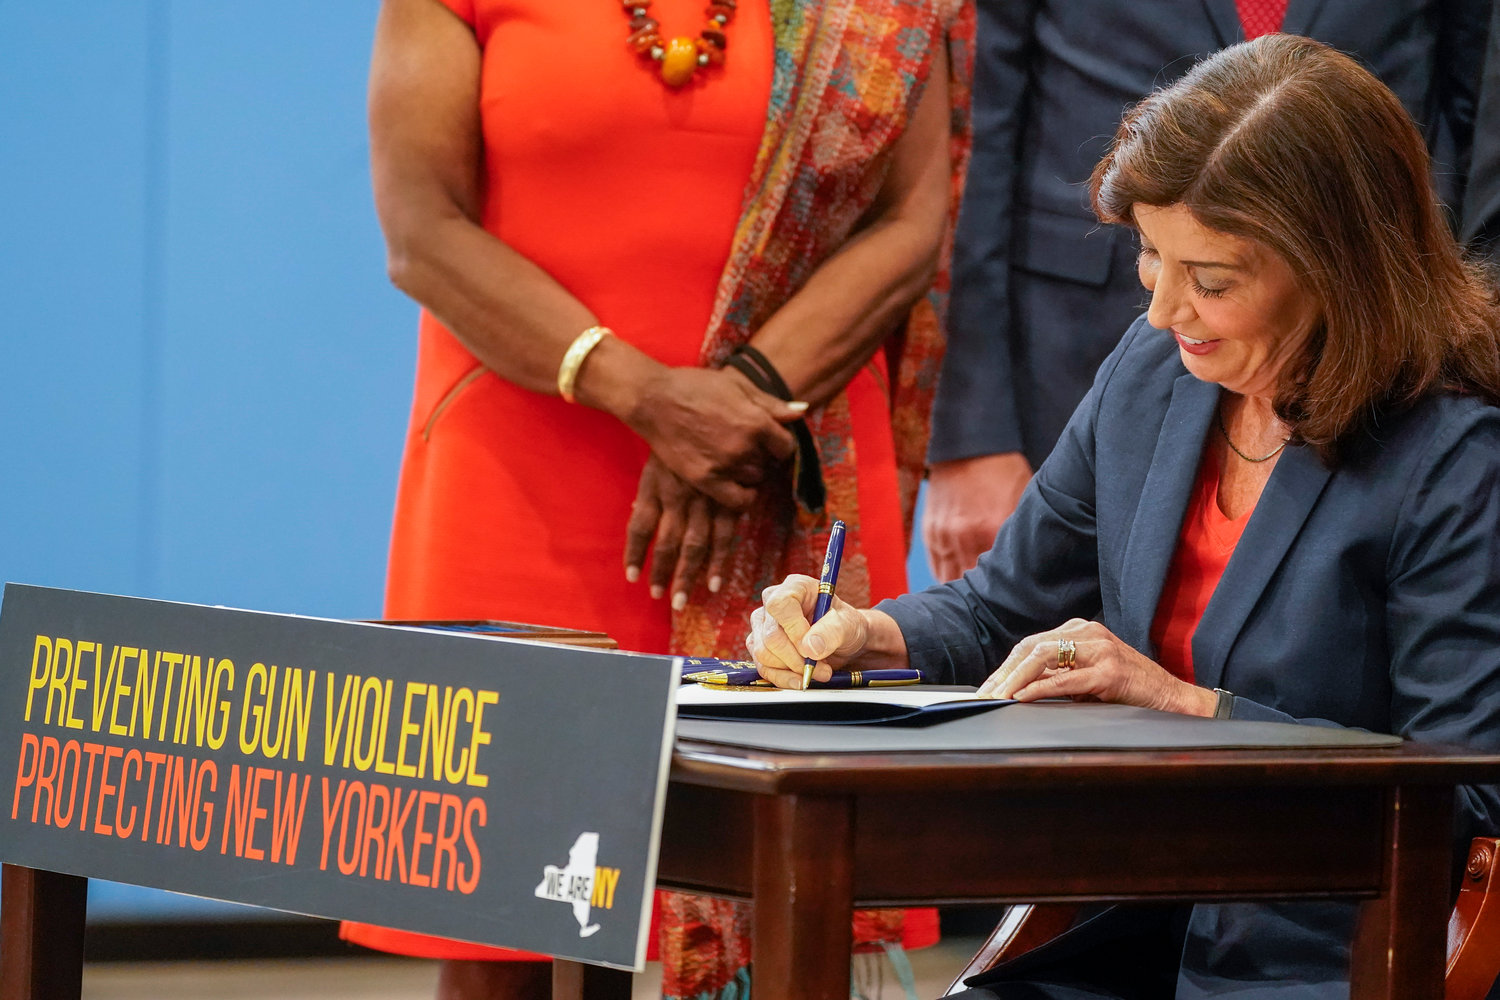 New York Gov. Kathy Hochul signs a package of bills to strengthen gun laws, Monday, June 6, 2022, in New York. New York has strengthened gun laws as part of a series of laws signed this week by Gov. Kathy Hochul with the hope to lessen gun violence and gun-related deaths. Hochul, a Democrat, signed 10 gun-related bills Monday. (AP Photo/Mary Altaffer)